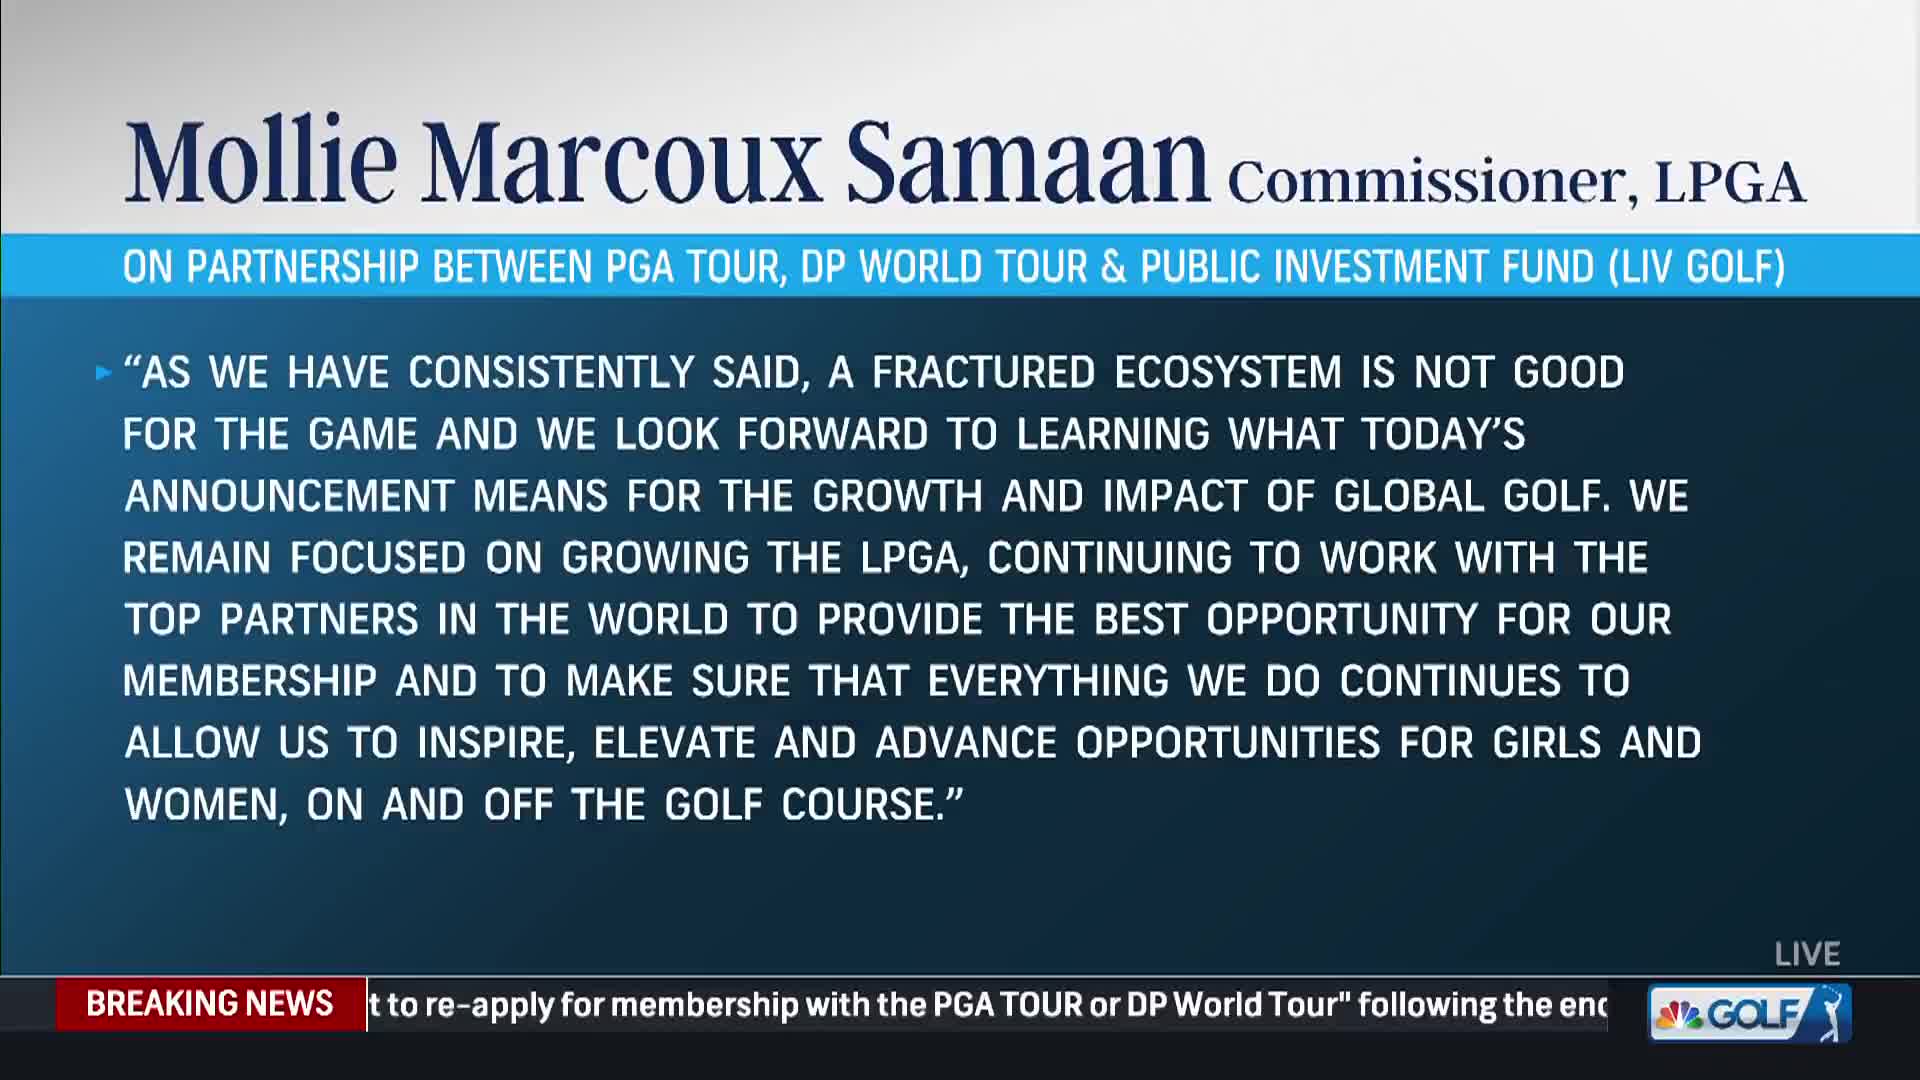 Did legal vulnerability cause pro golf merger?